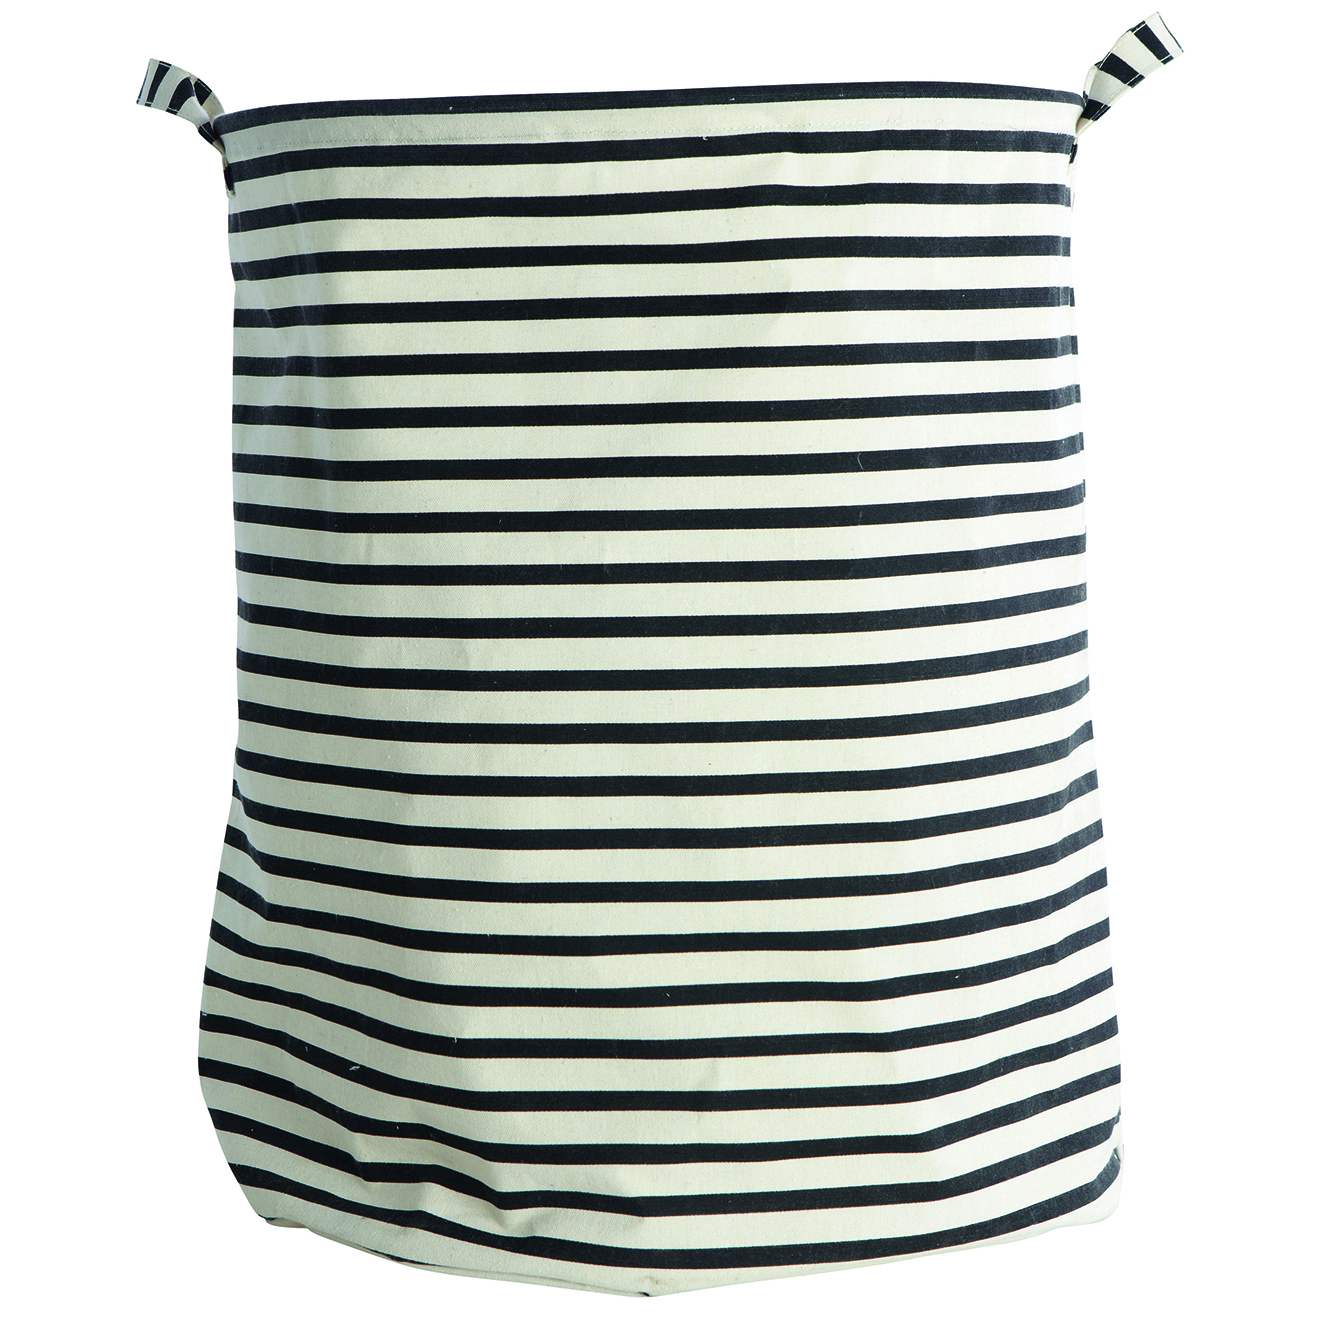 House Doctor Black and White Striped Laundry Storage Basket